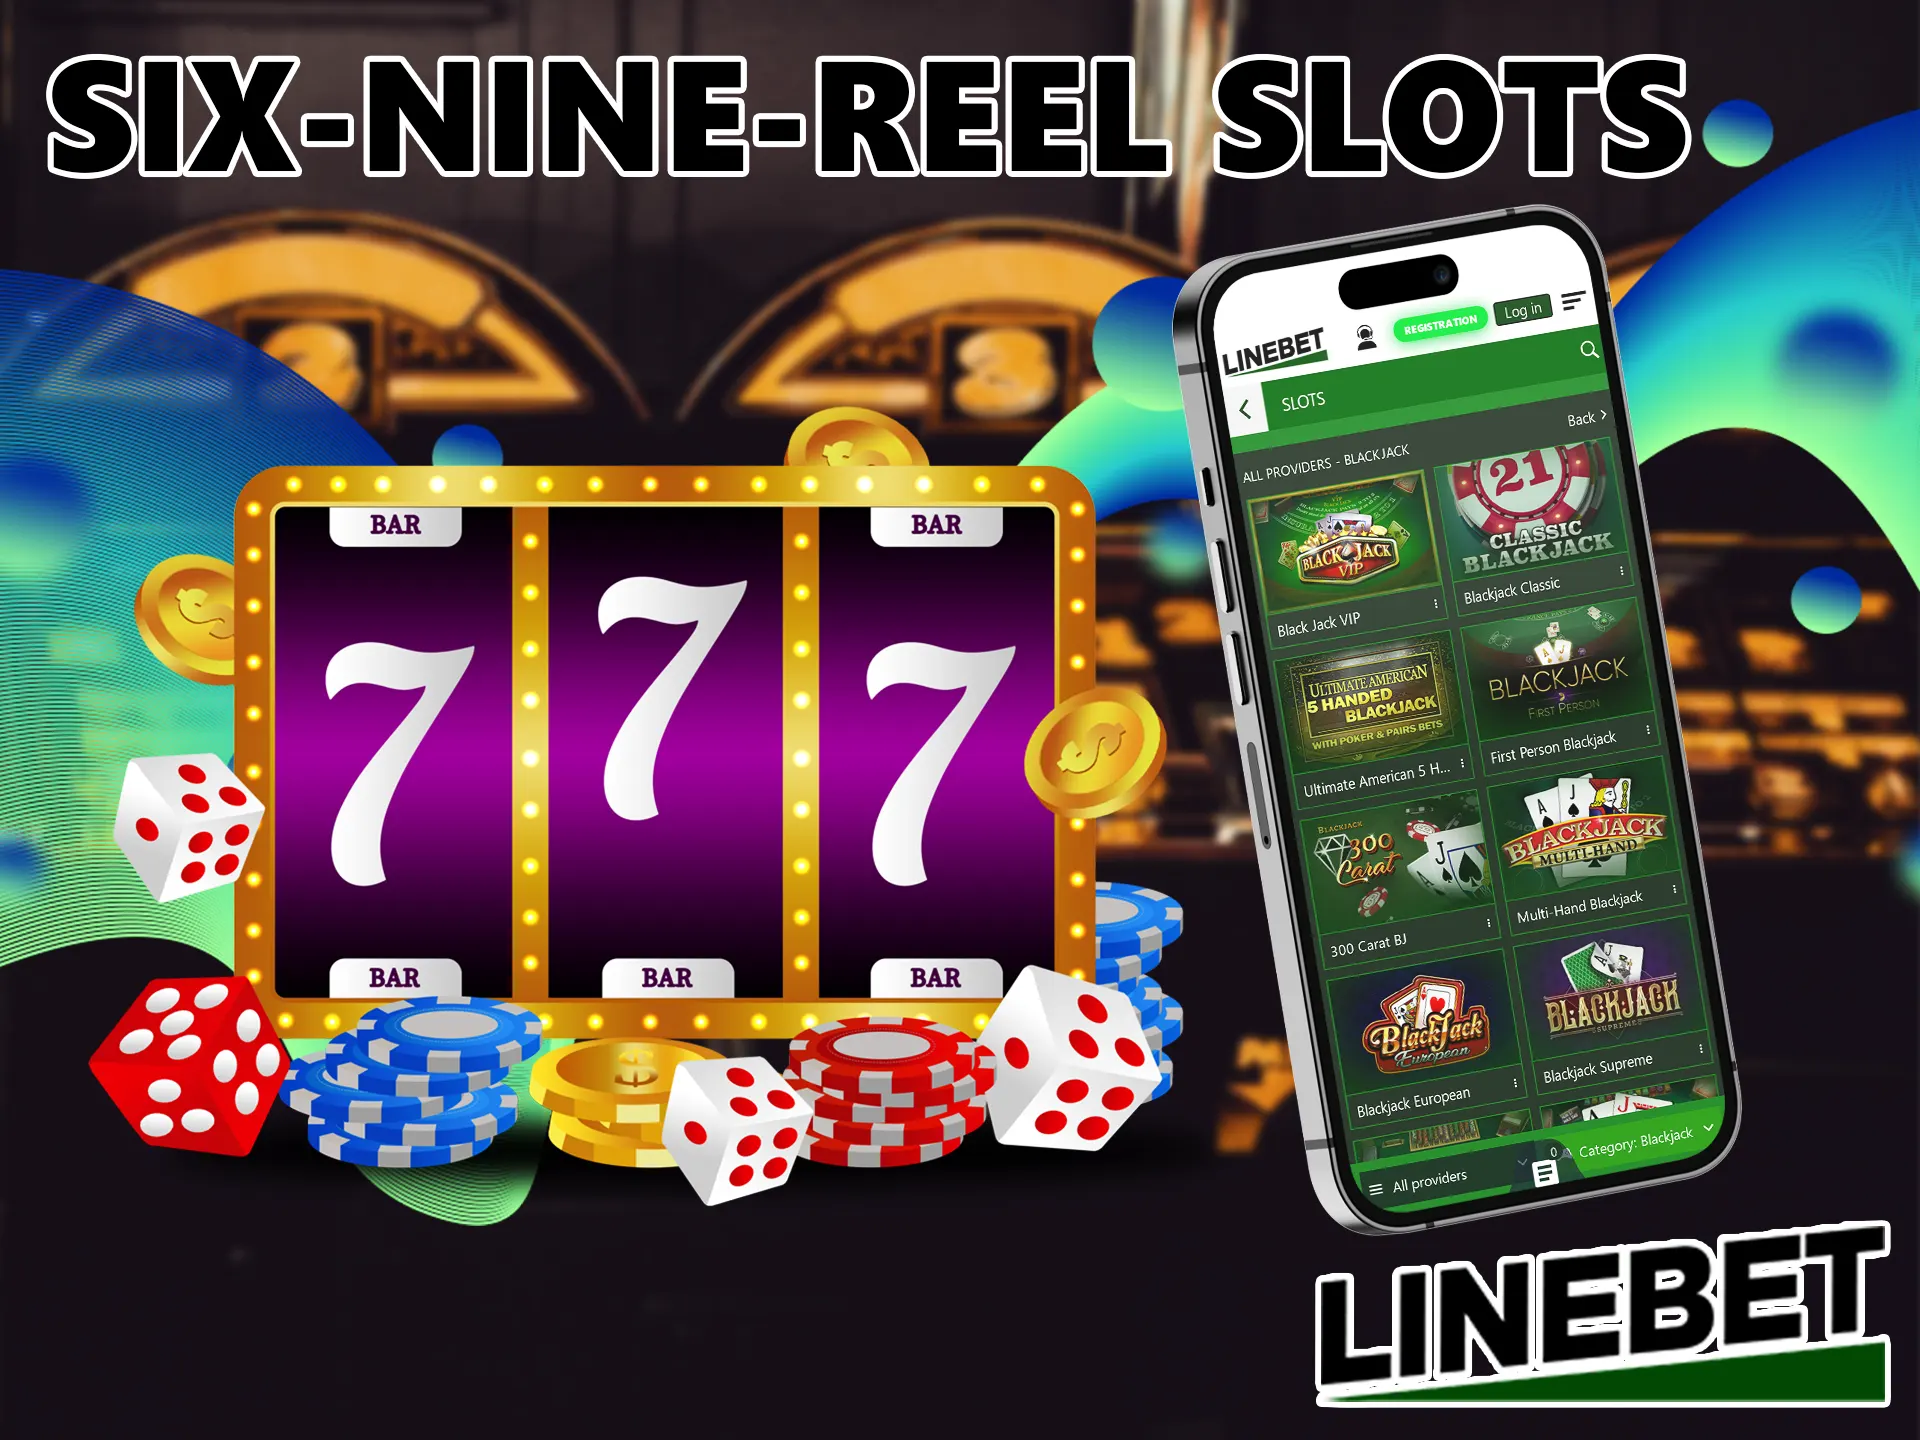 This kind in Linebet has a large number of reels (up to 9), they function in exactly the same way as the 5-reel and offer more chances to win.